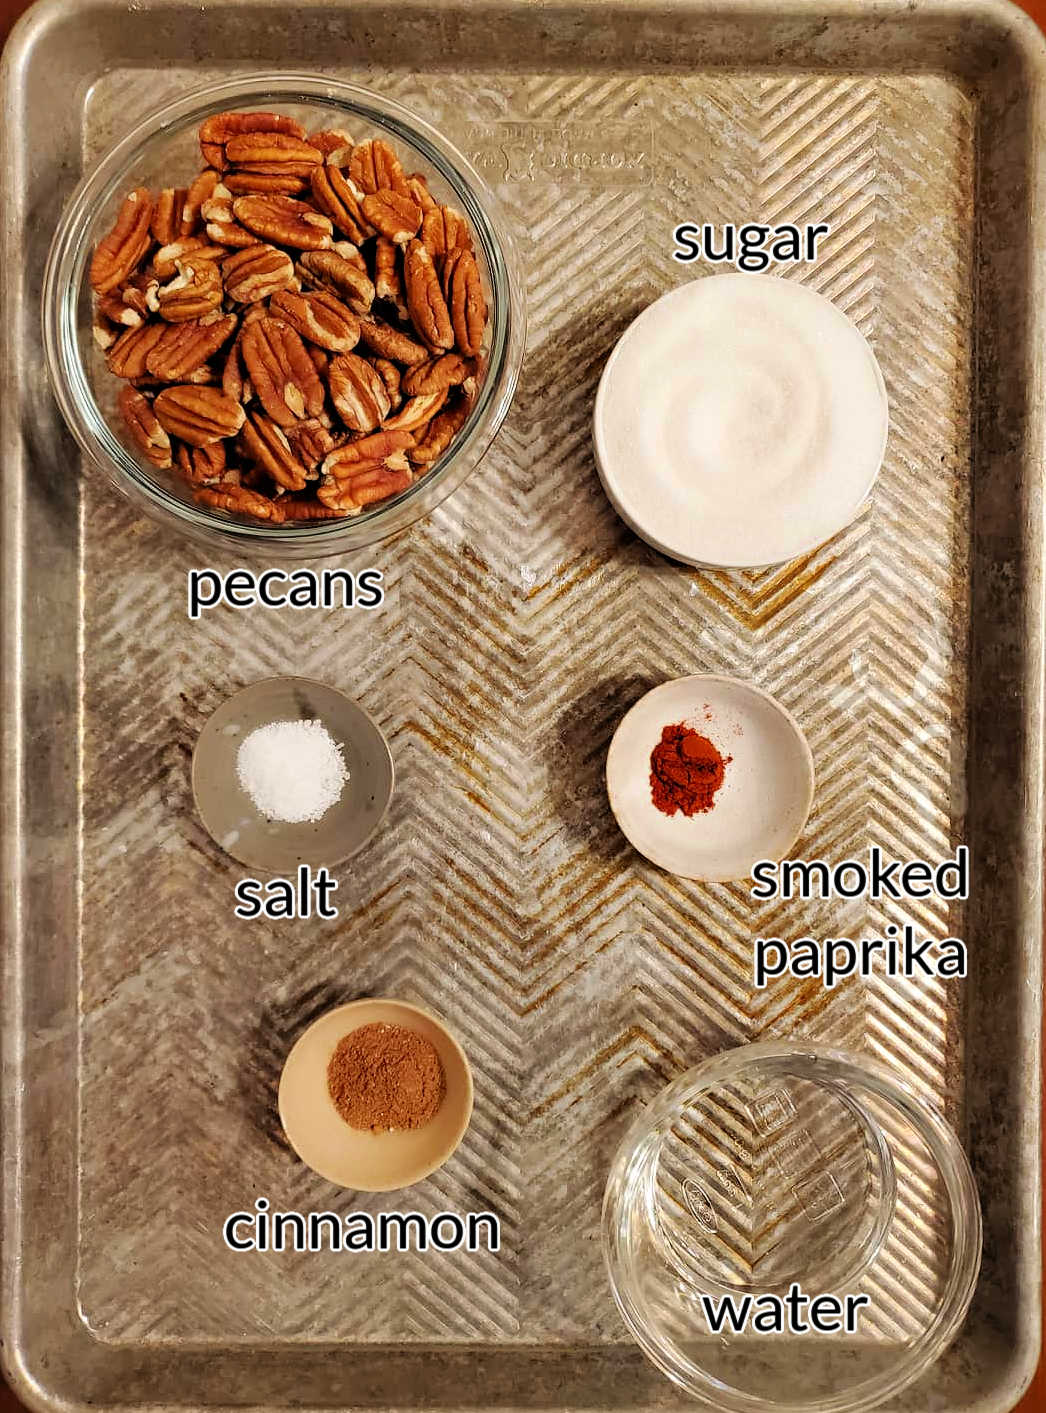 A collage of the ingredients for making cinnamon glazed nuts: pecans, sugar, salt, paprika, cinnamon, sugar, and water.